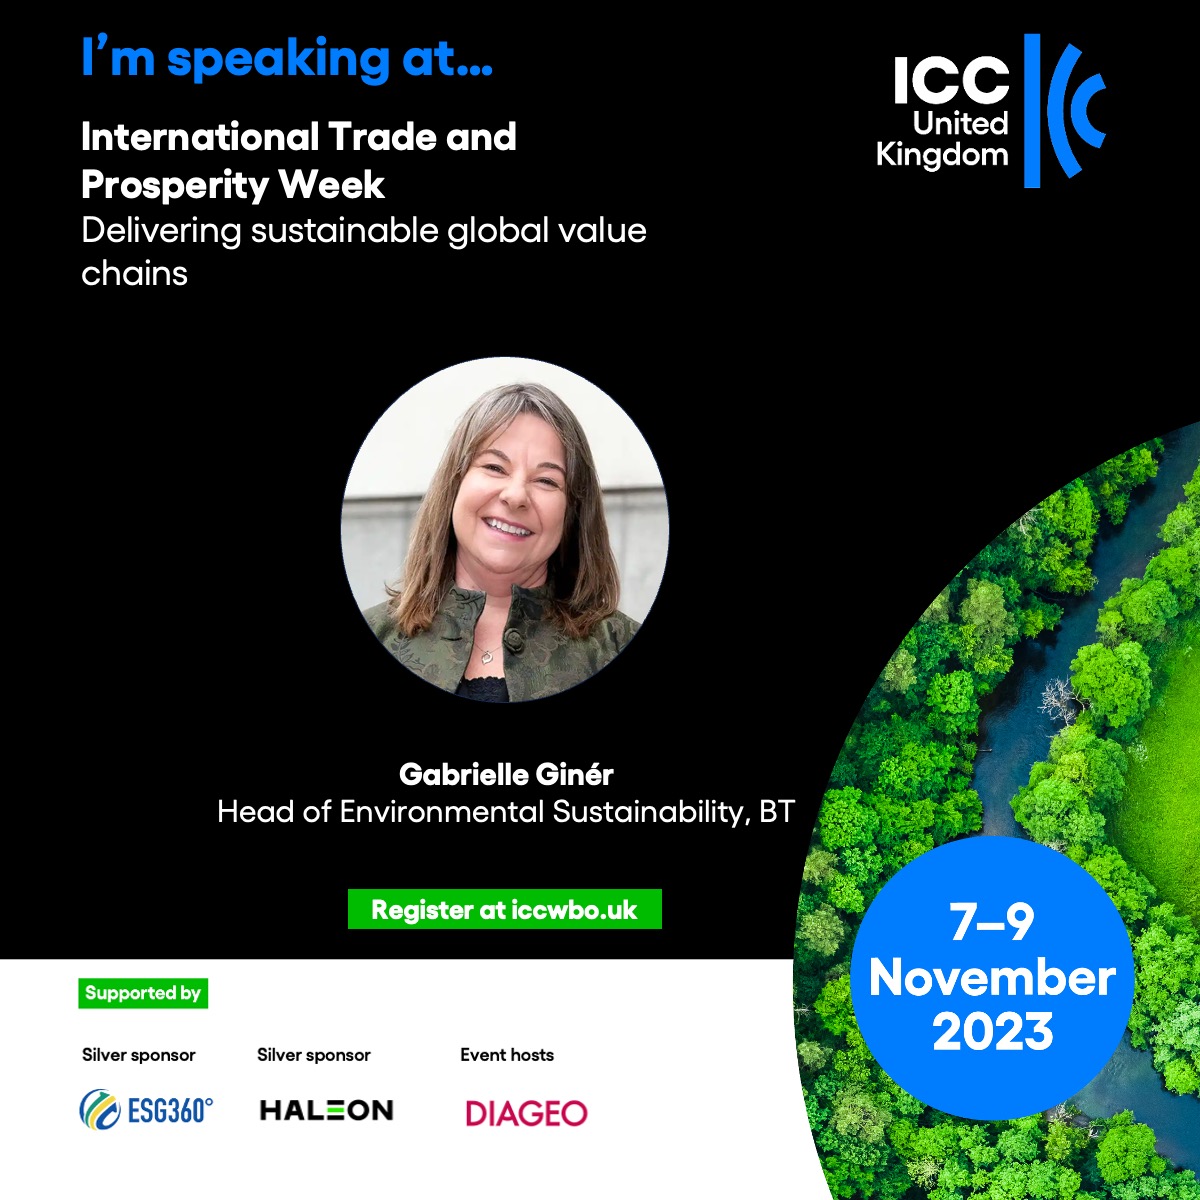 1 week to go until #ITPW2023 begins!

We are delighted that Gabrielle Ginér, Head of Environmental Sustainabilty, BT will be speaking on Day 2.

Don’t hesitate in booking your place: bit.ly/46LCptv

#WeAreICC #Trade #NetZero

@iccwbo